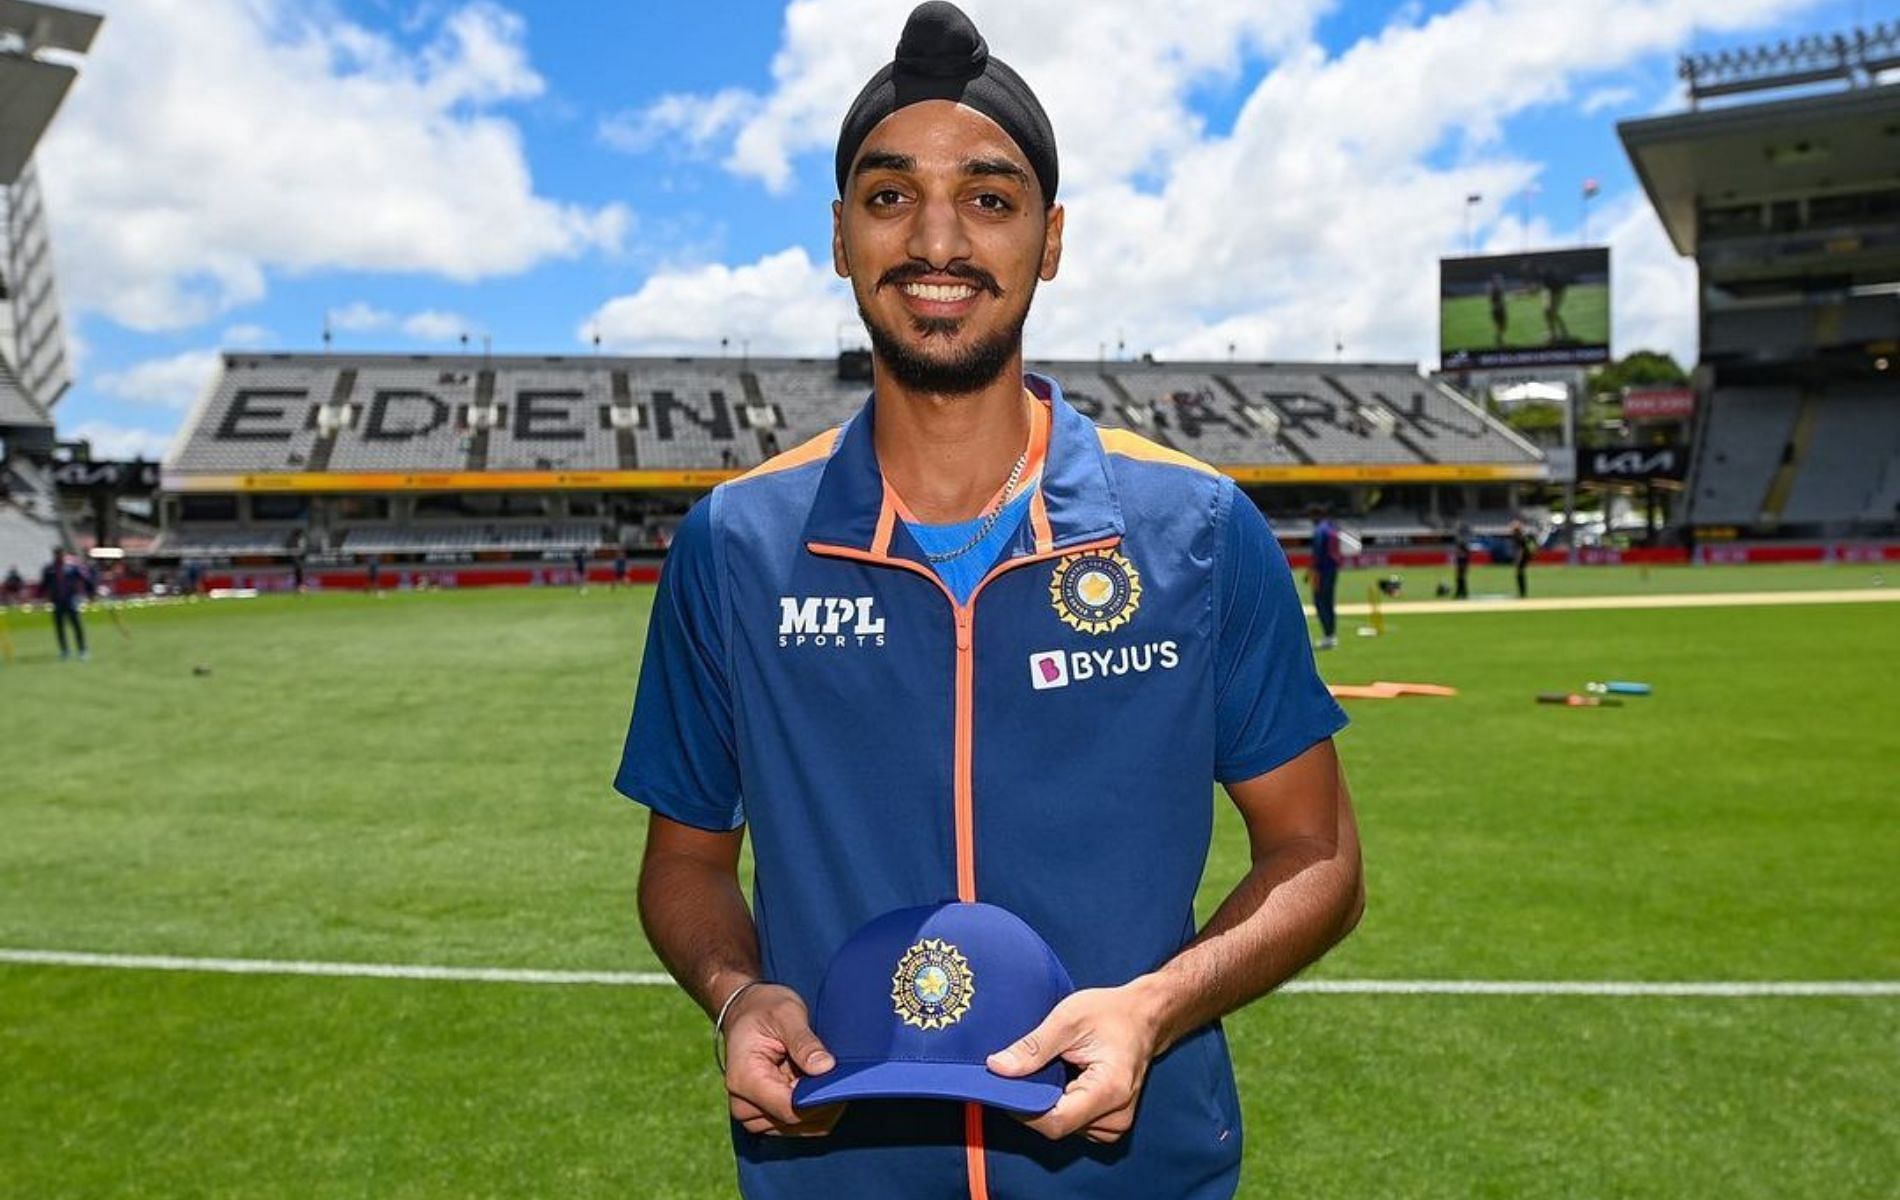 Arshdeep Singh failed to pick up a single wicket on his ODI debut. (Pic: Instagram)